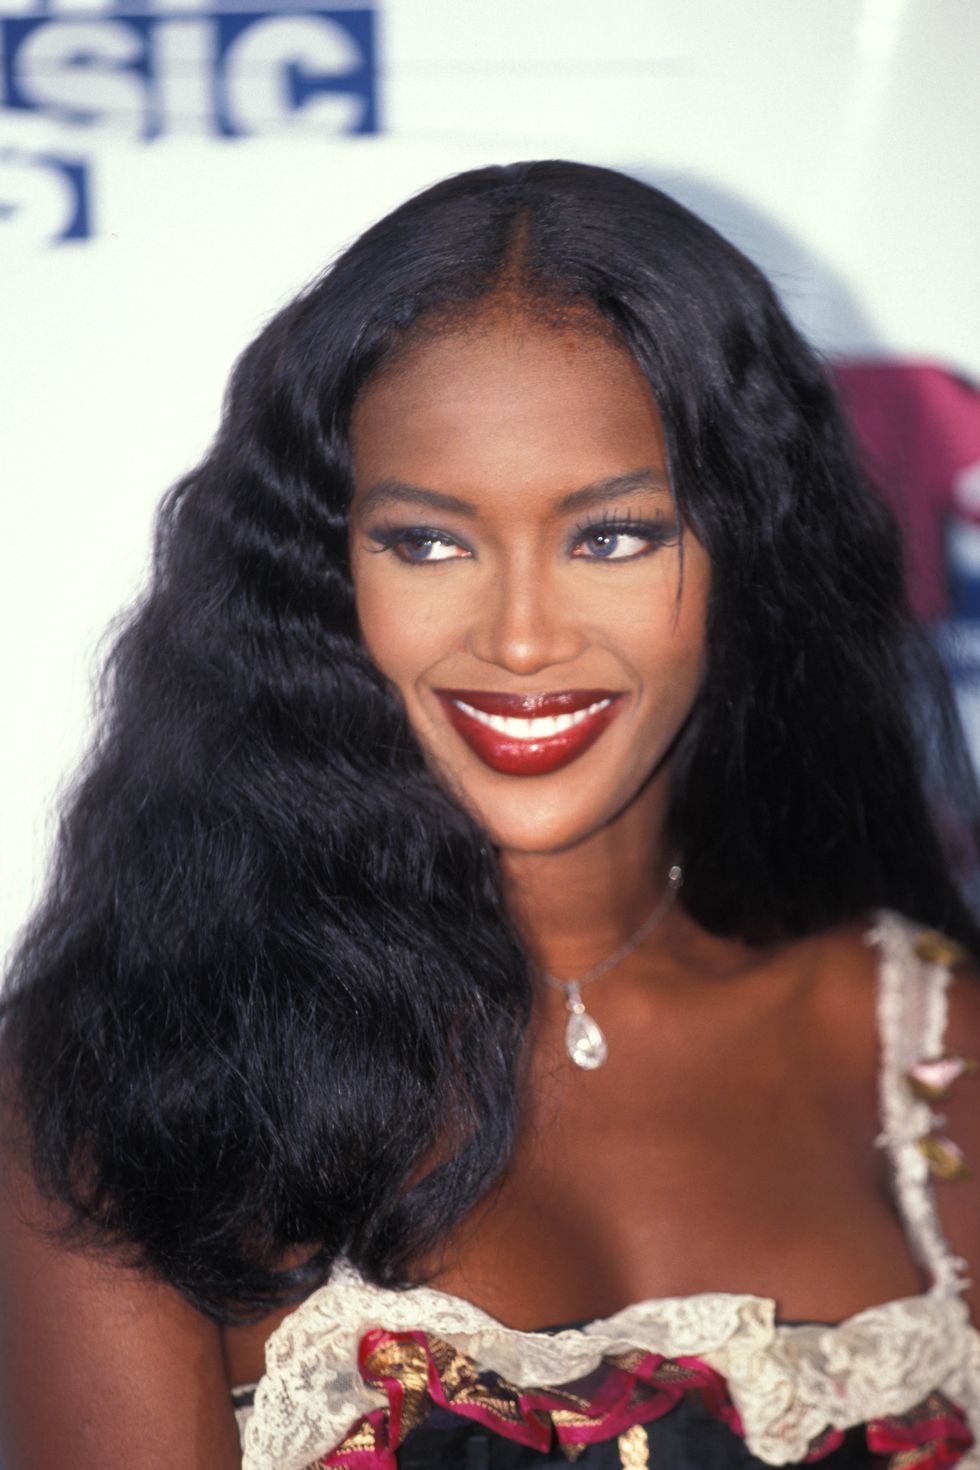 The Best 90s Makeup Looks To Recreate